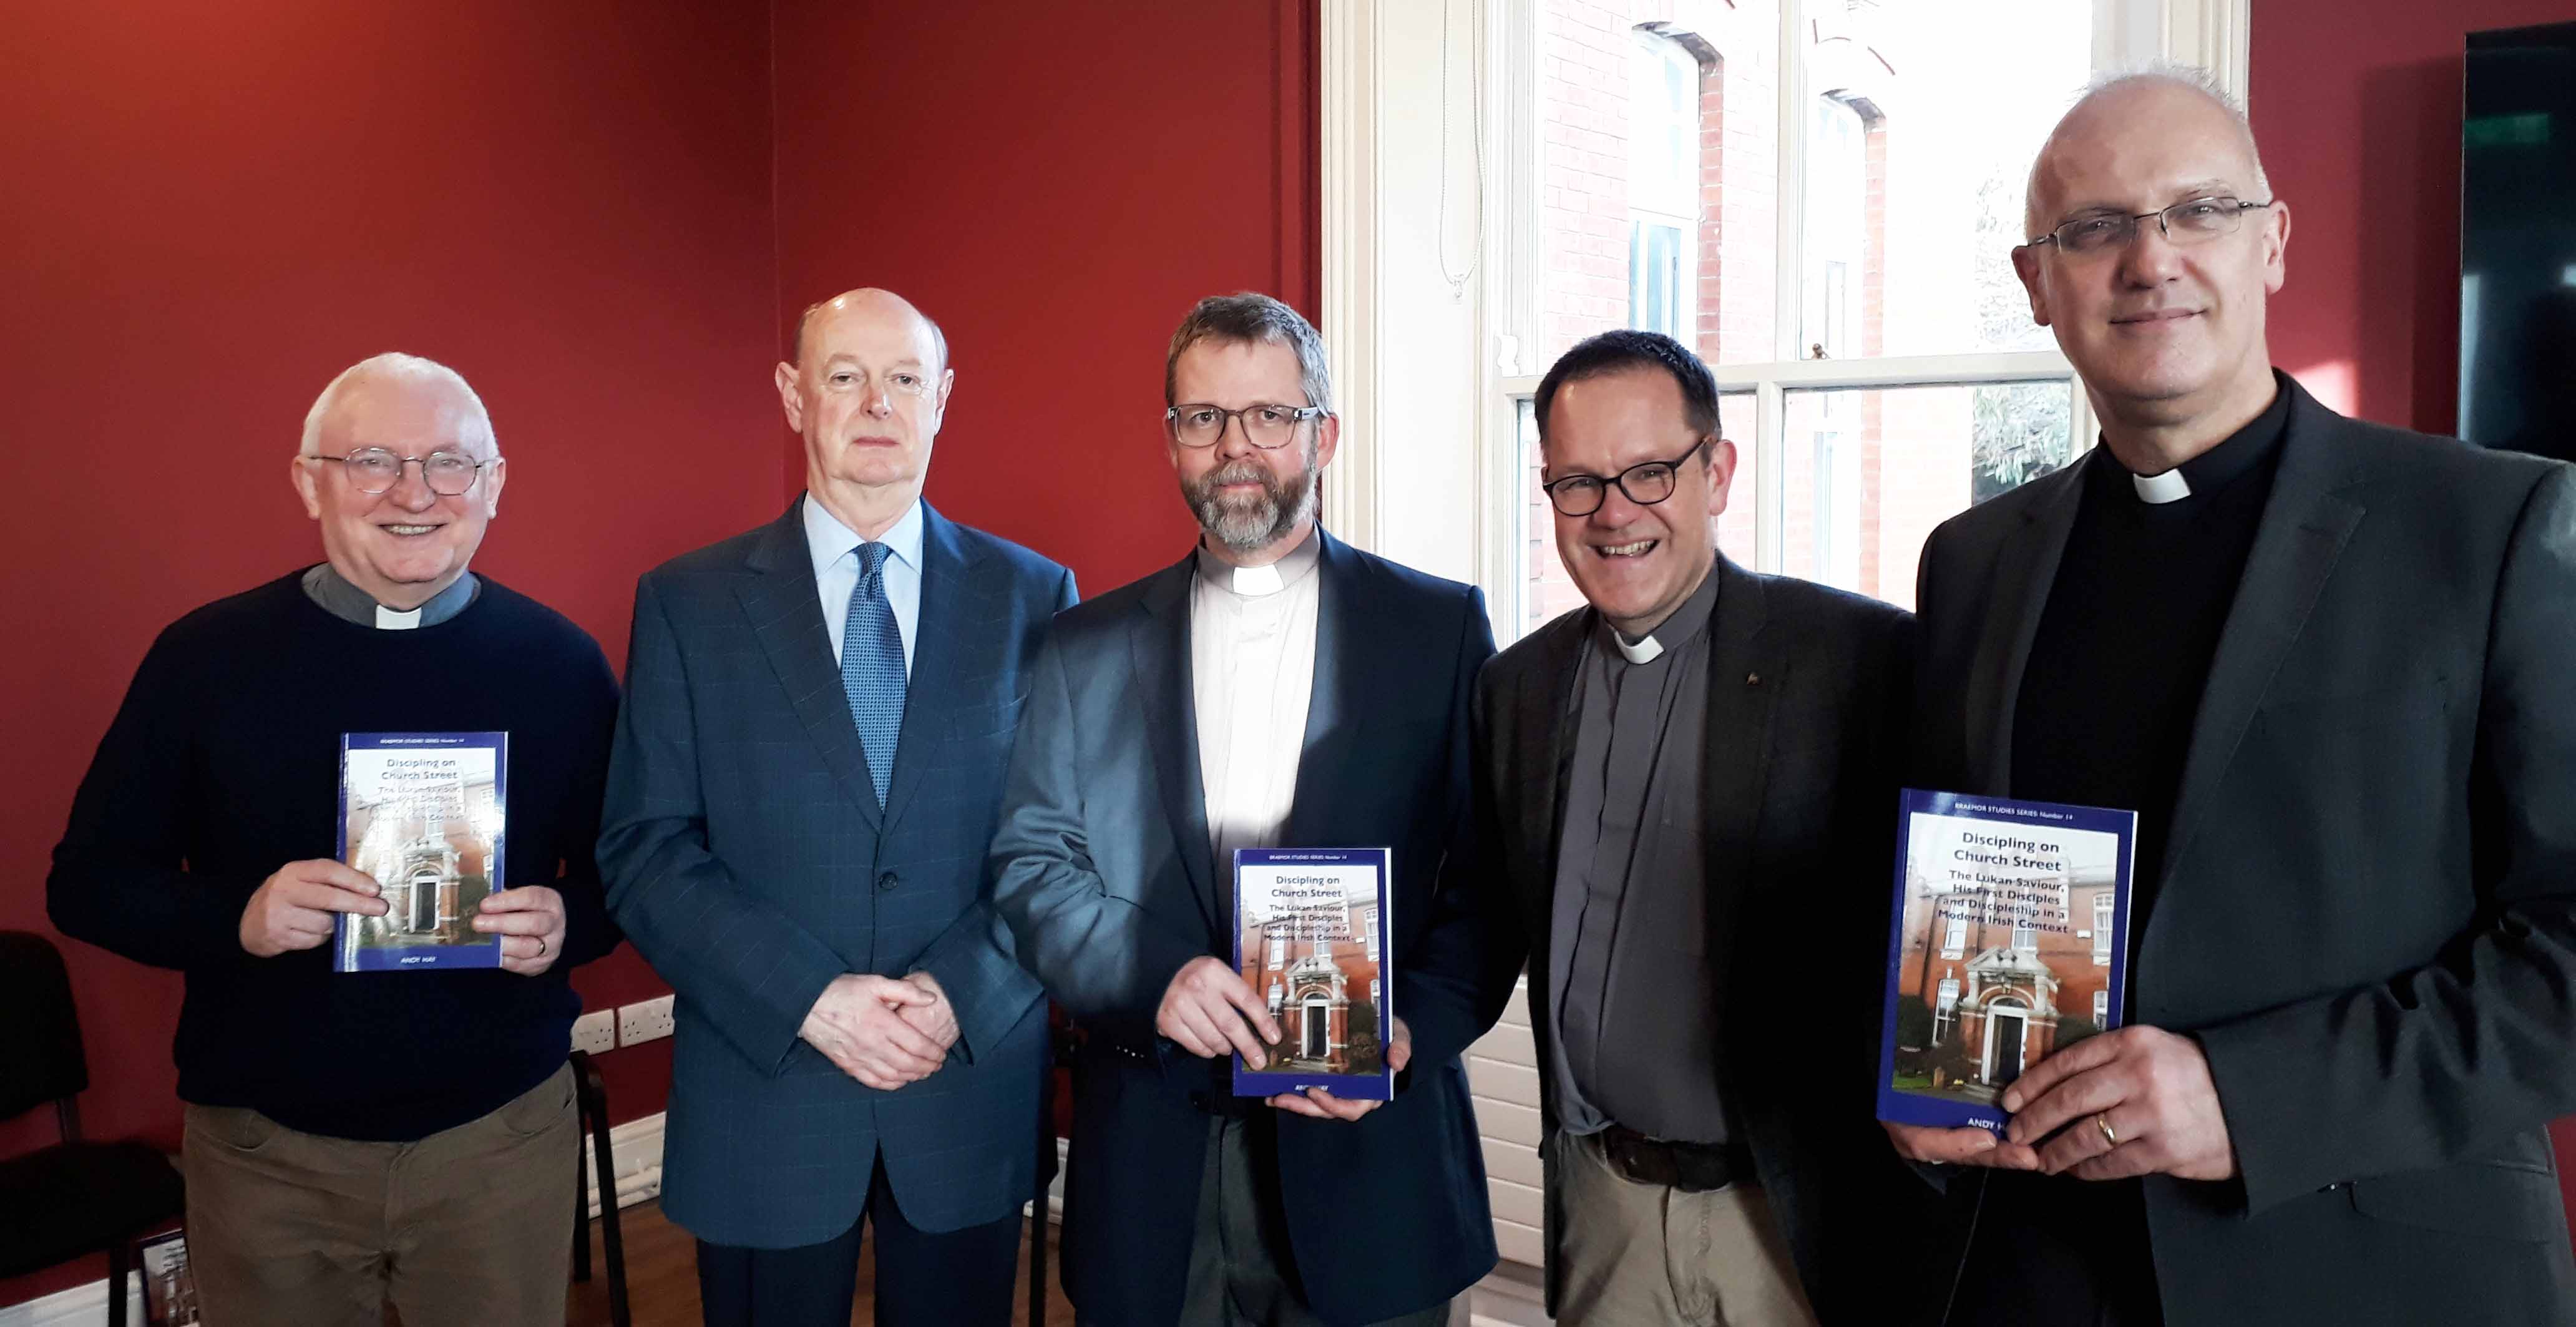 From left: the Revd Dr Paddy McGlinchey, Dr Raymond Refaussé (Church of Ireland Publishing), the Revd Andy Hay, Canon Jonathan Pierce, and Canon Dr Maurice Elliott.